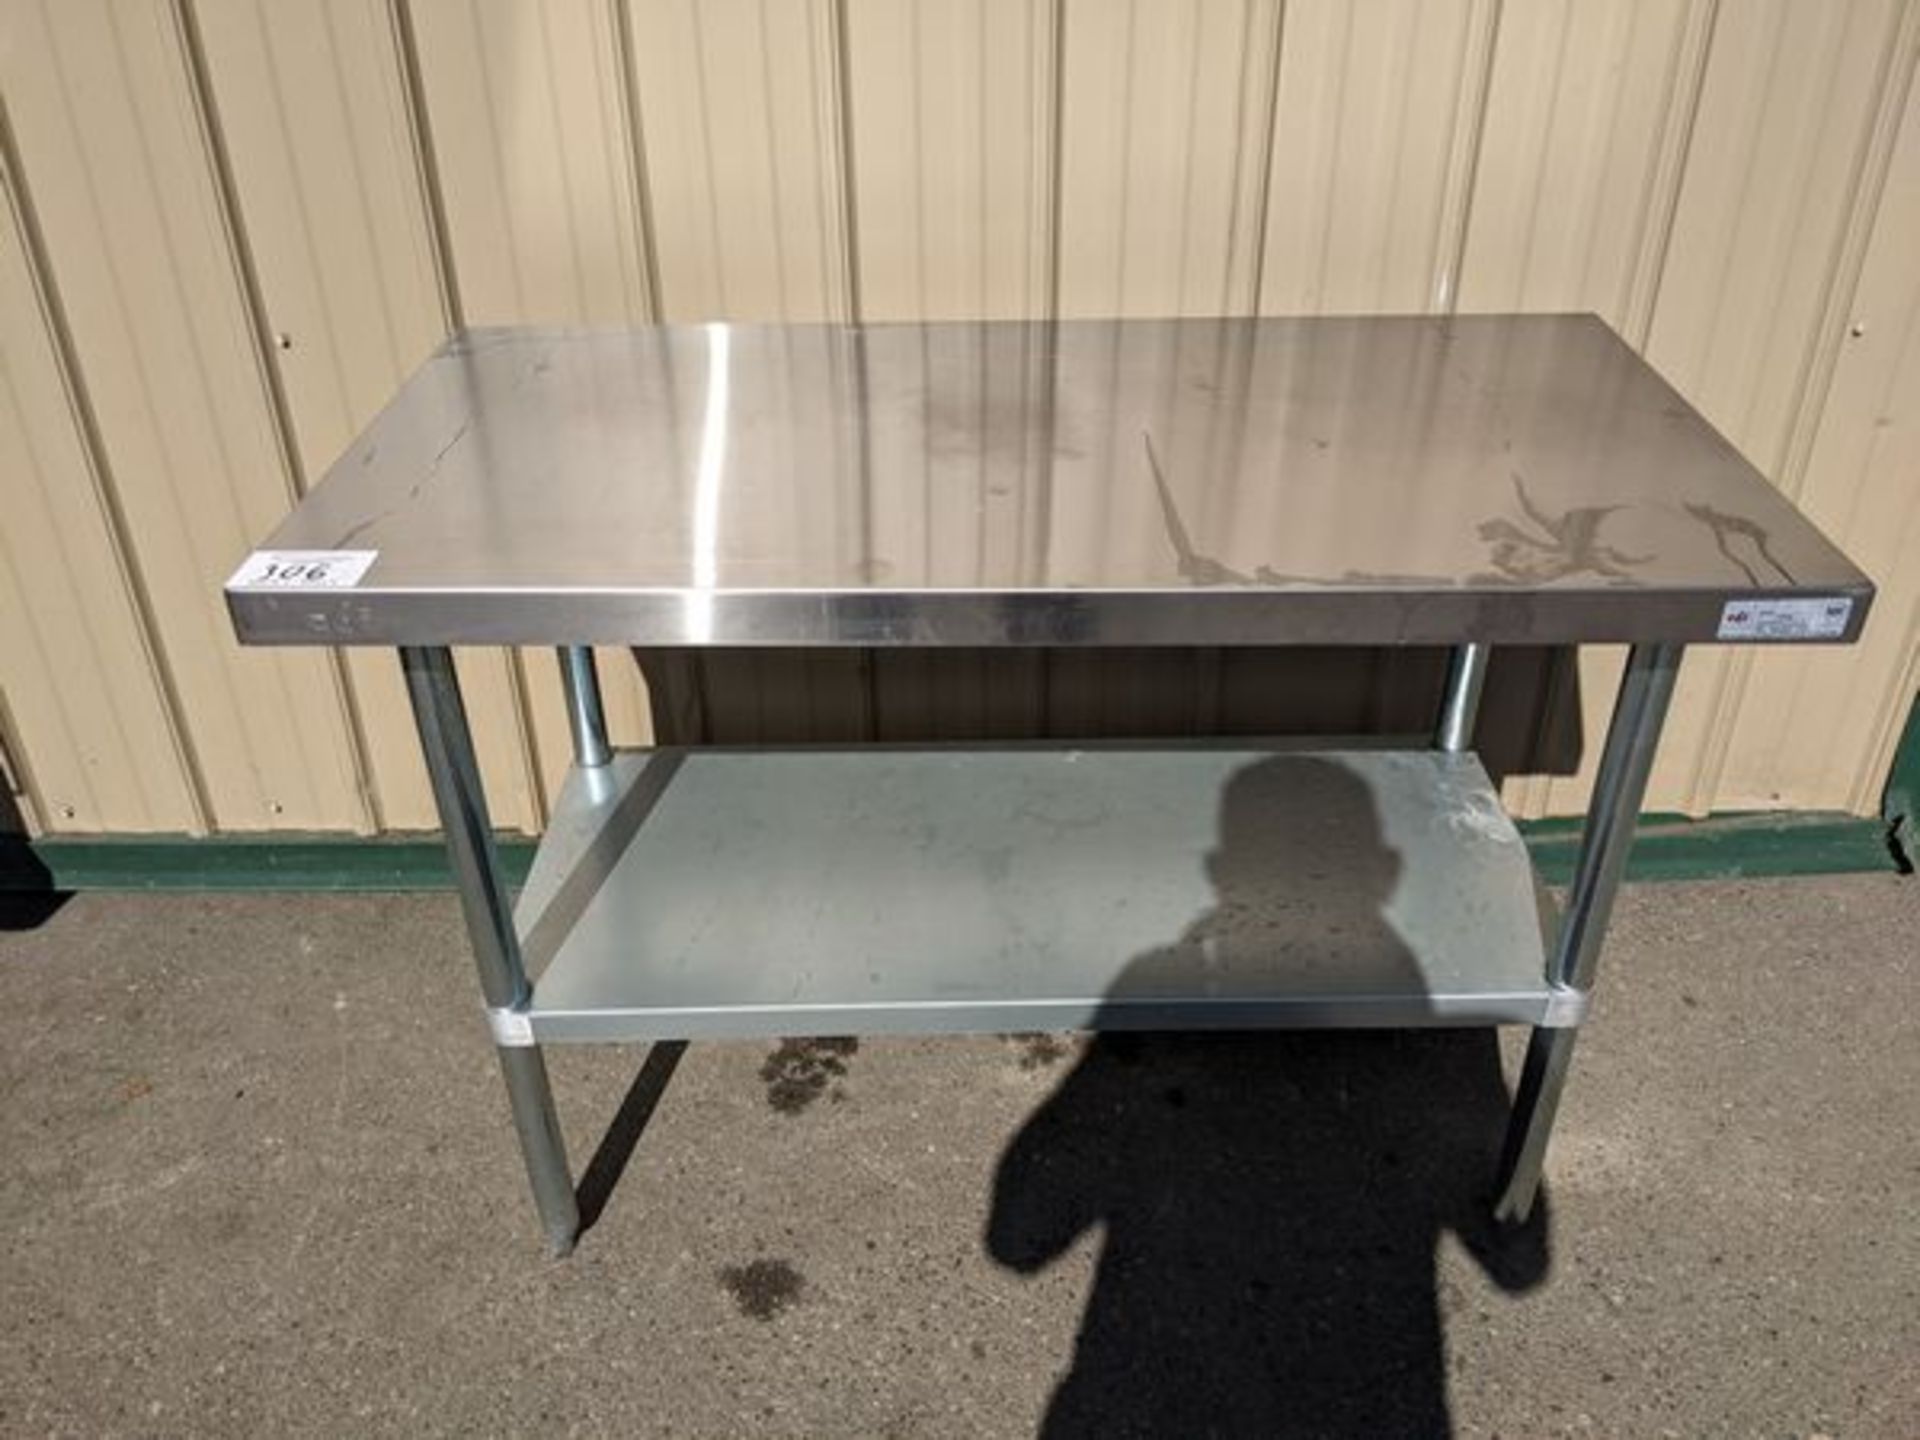 48 x 24" Two Tier EFI Stainless Steel Work Table